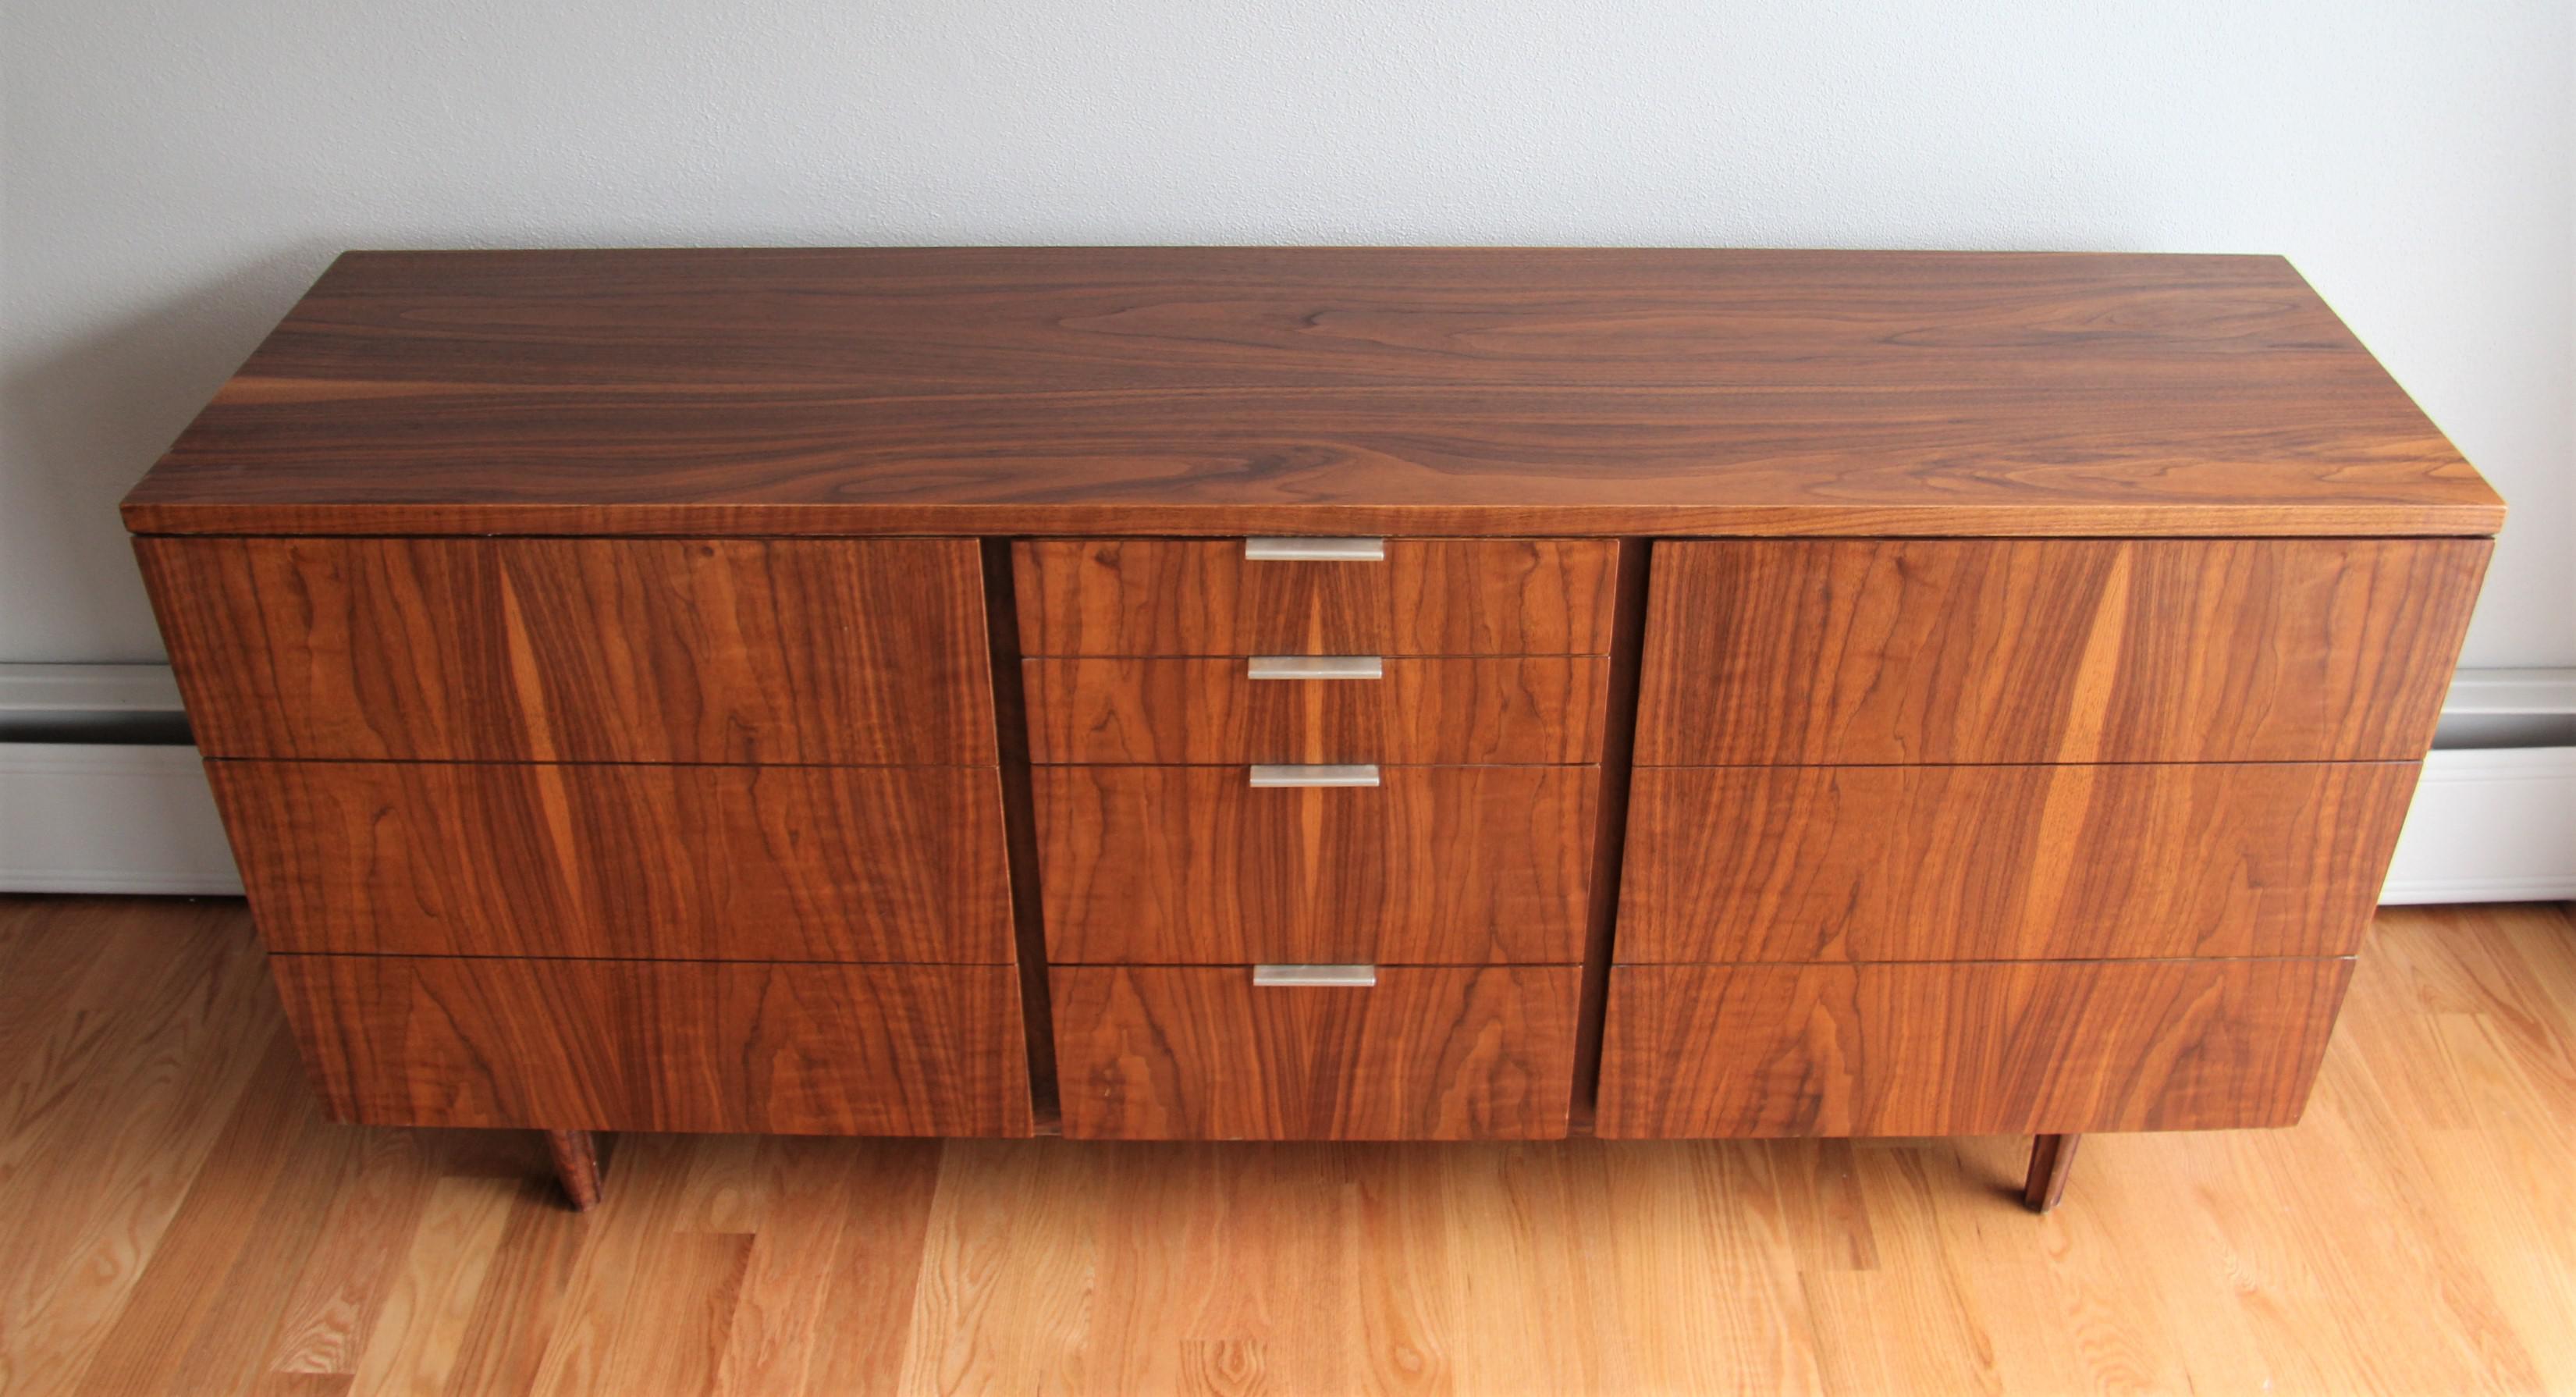 Mid-Century Modern bookmatched walnut triple dresser designed by John Stuart for Johnson Furniture Company. This piece boasts rich warm vibrant wood tones and superior craftsmanship. Plenty of storage with four center drawers flanked by banks of